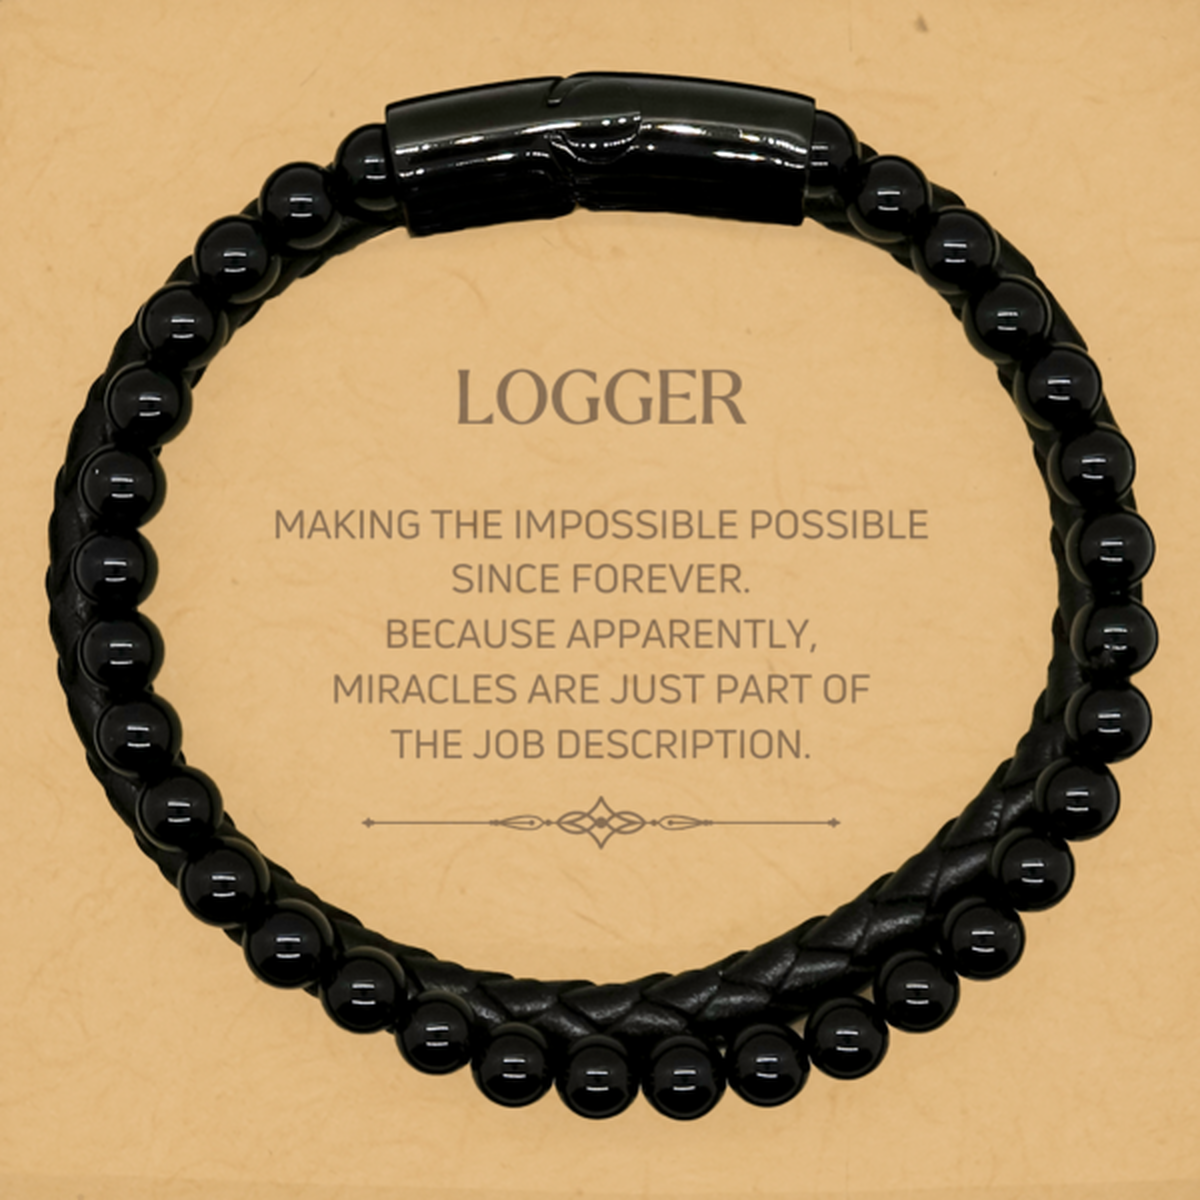 Funny Logger Gifts, Miracles are just part of the job description, Inspirational Birthday Stone Leather Bracelets For Logger, Men, Women, Coworkers, Friends, Boss